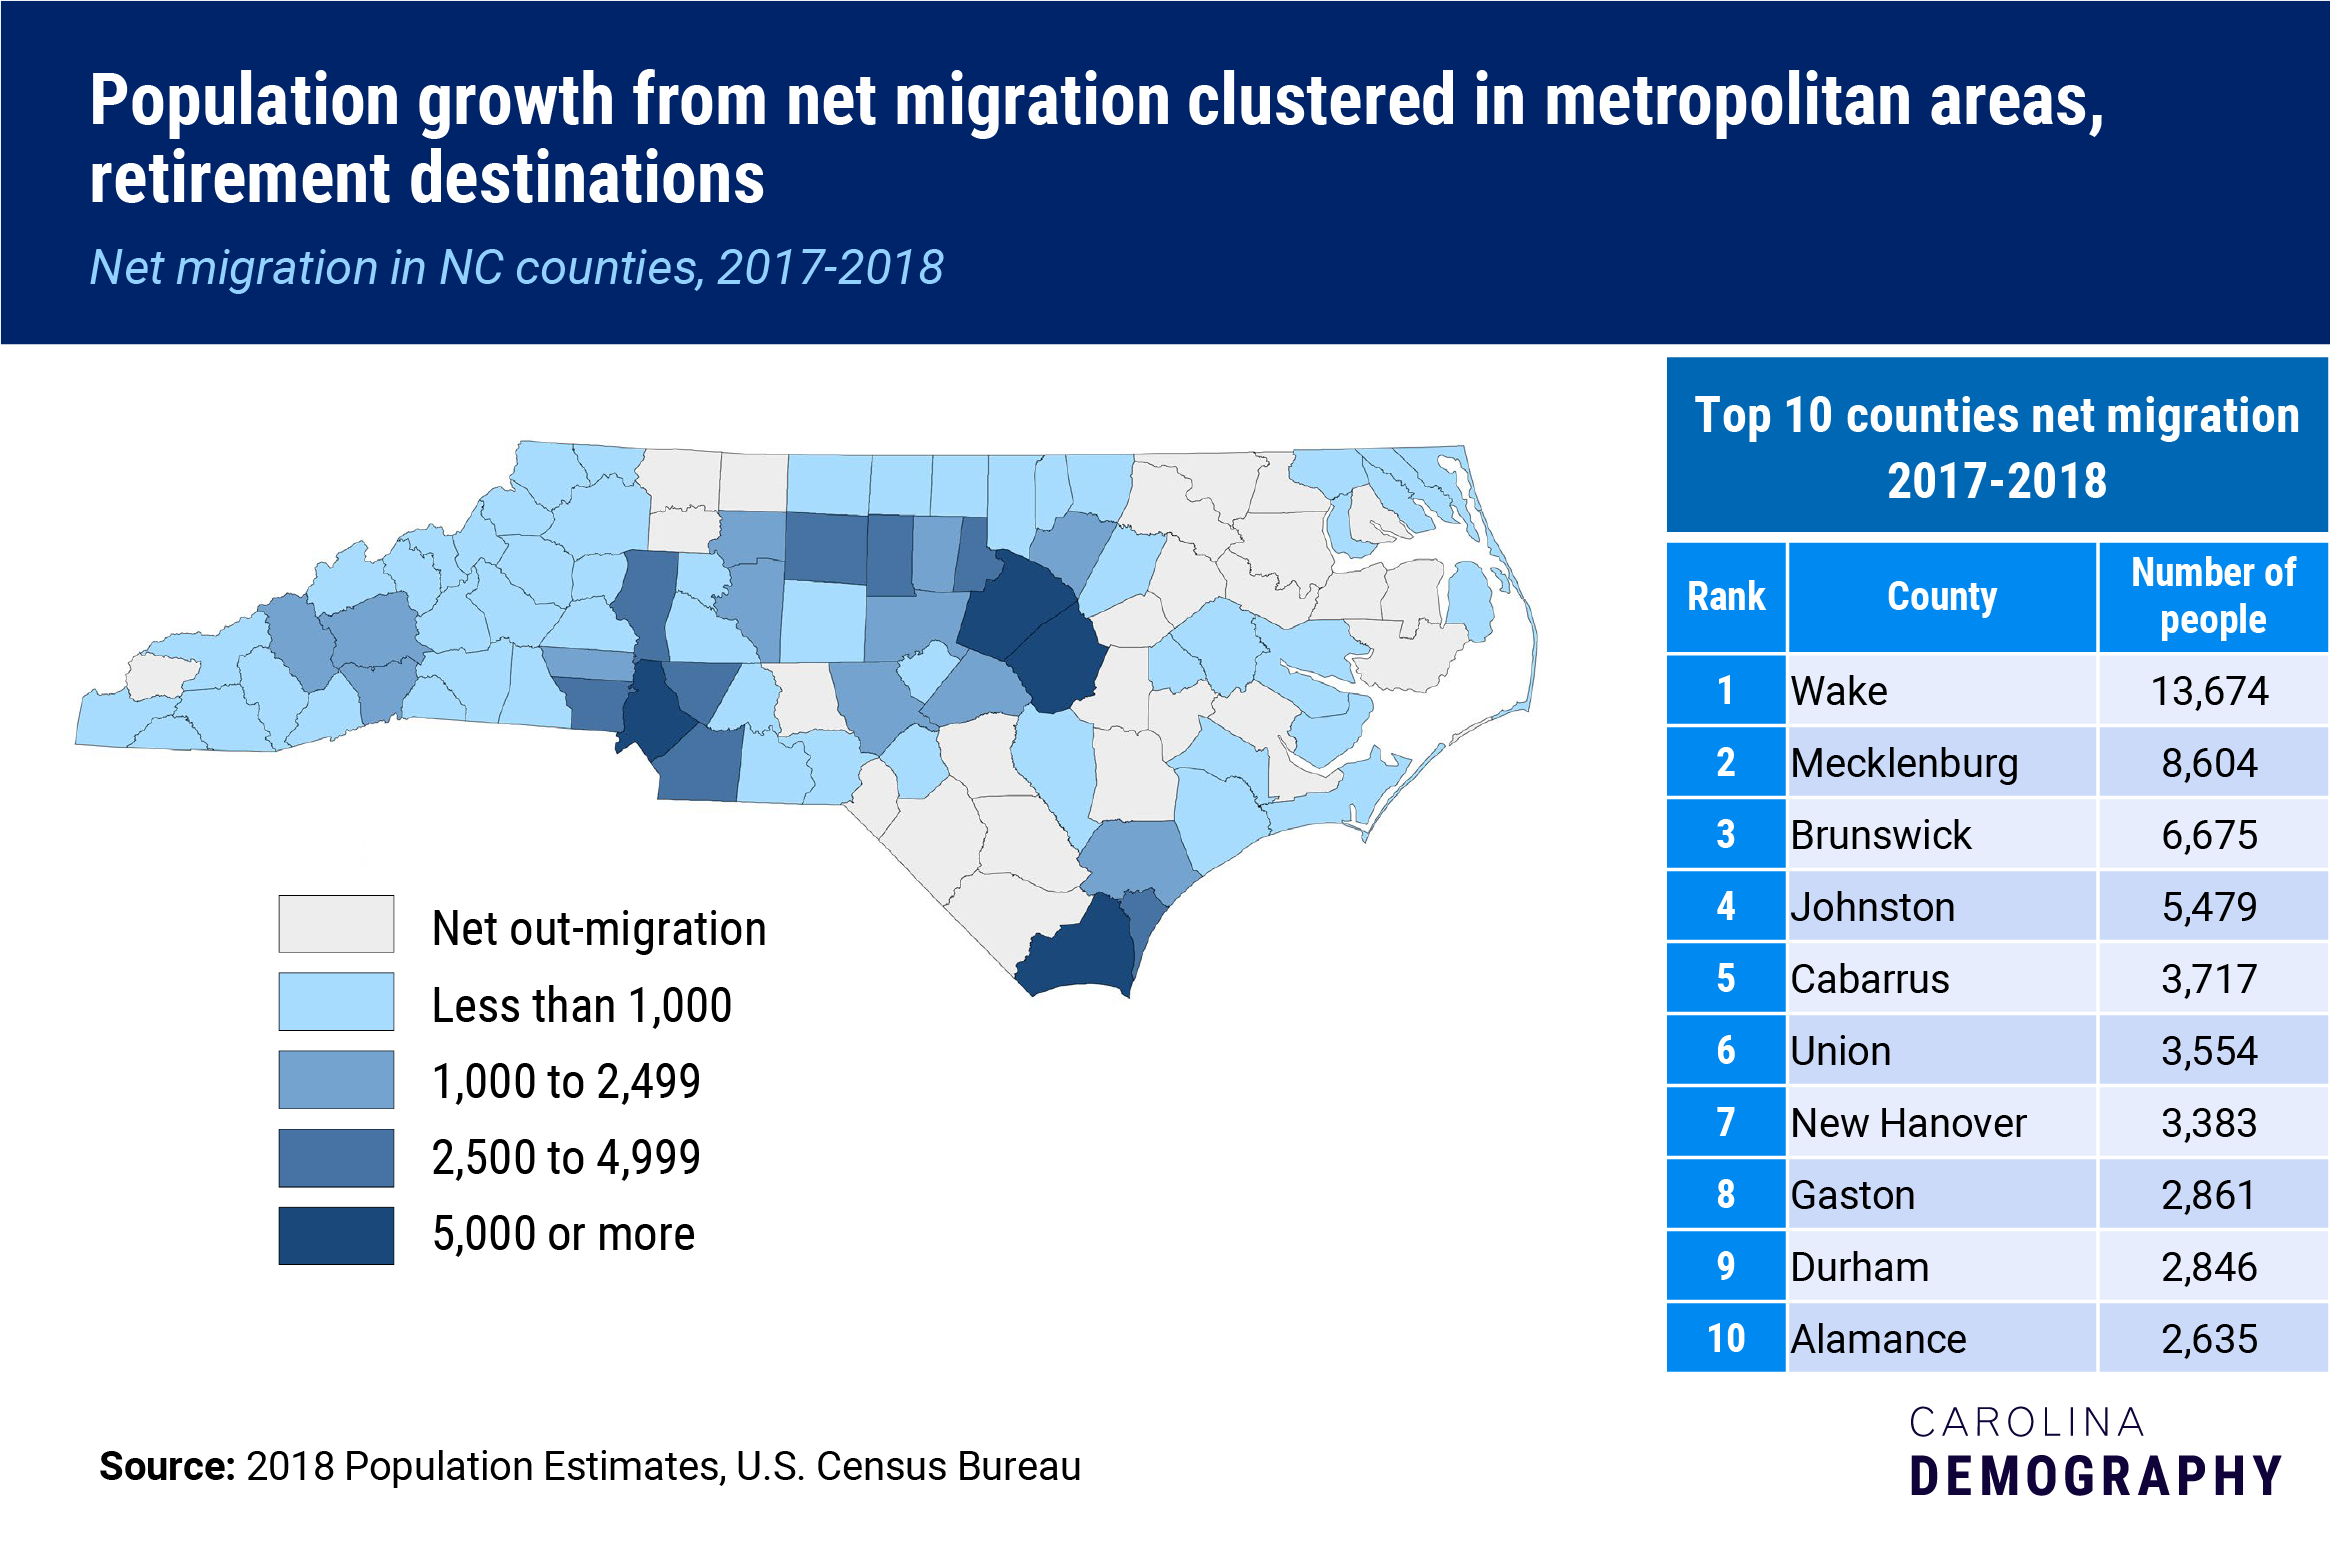 Population growth from net migration clustered in metropolitan areas, retirement destinations